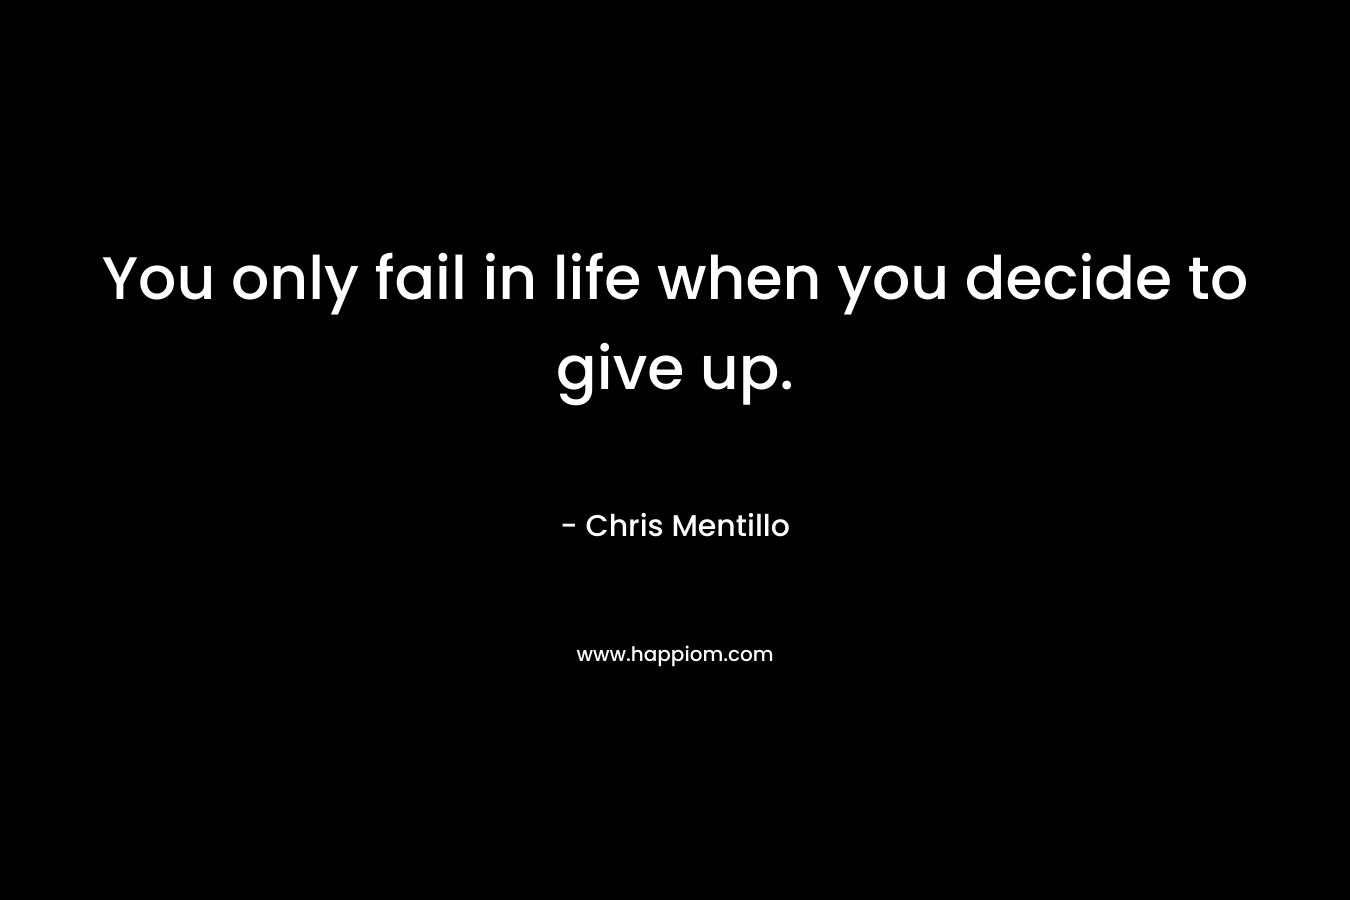 You only fail in life when you decide to give up.